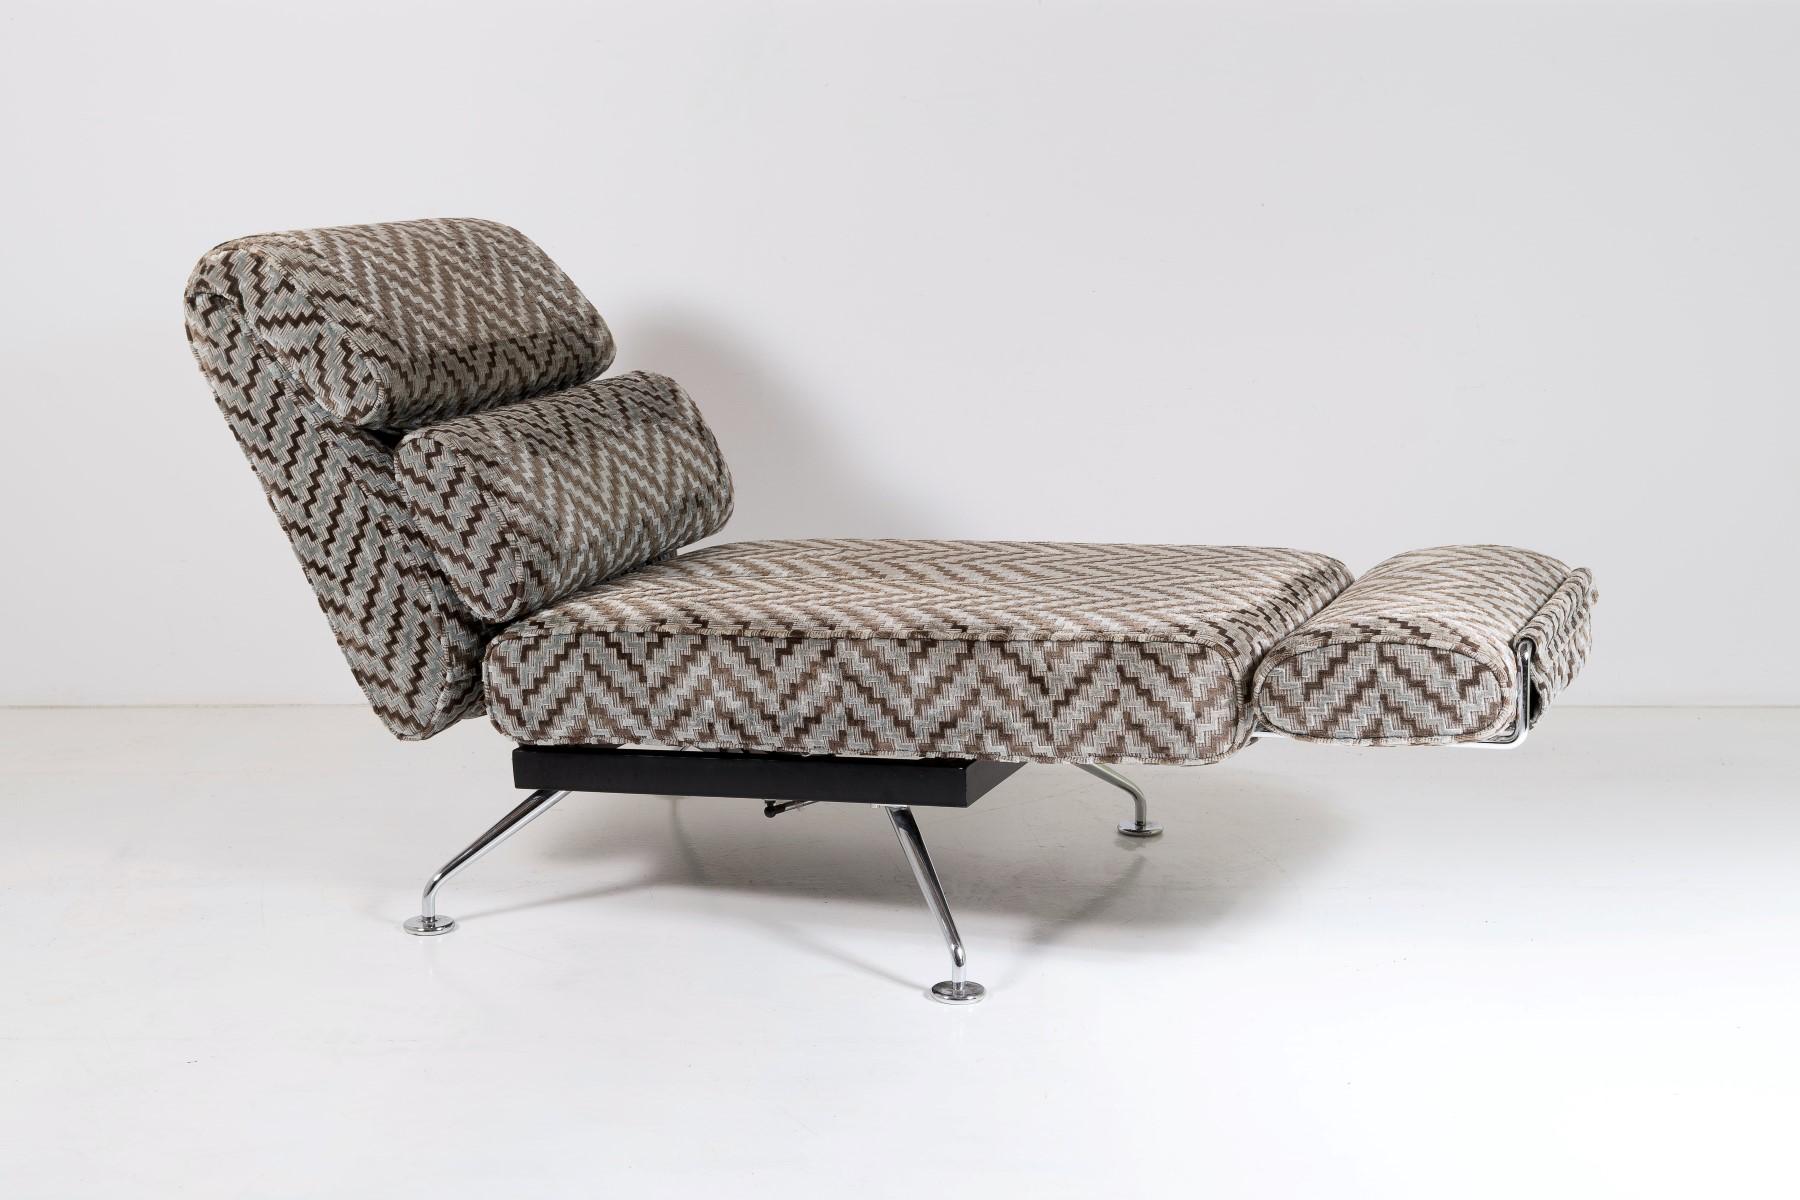 Mid-Century Modern 80s Modern Chaise Longue Day Bed Recliner Chair in Original Stone Chevron Fabric